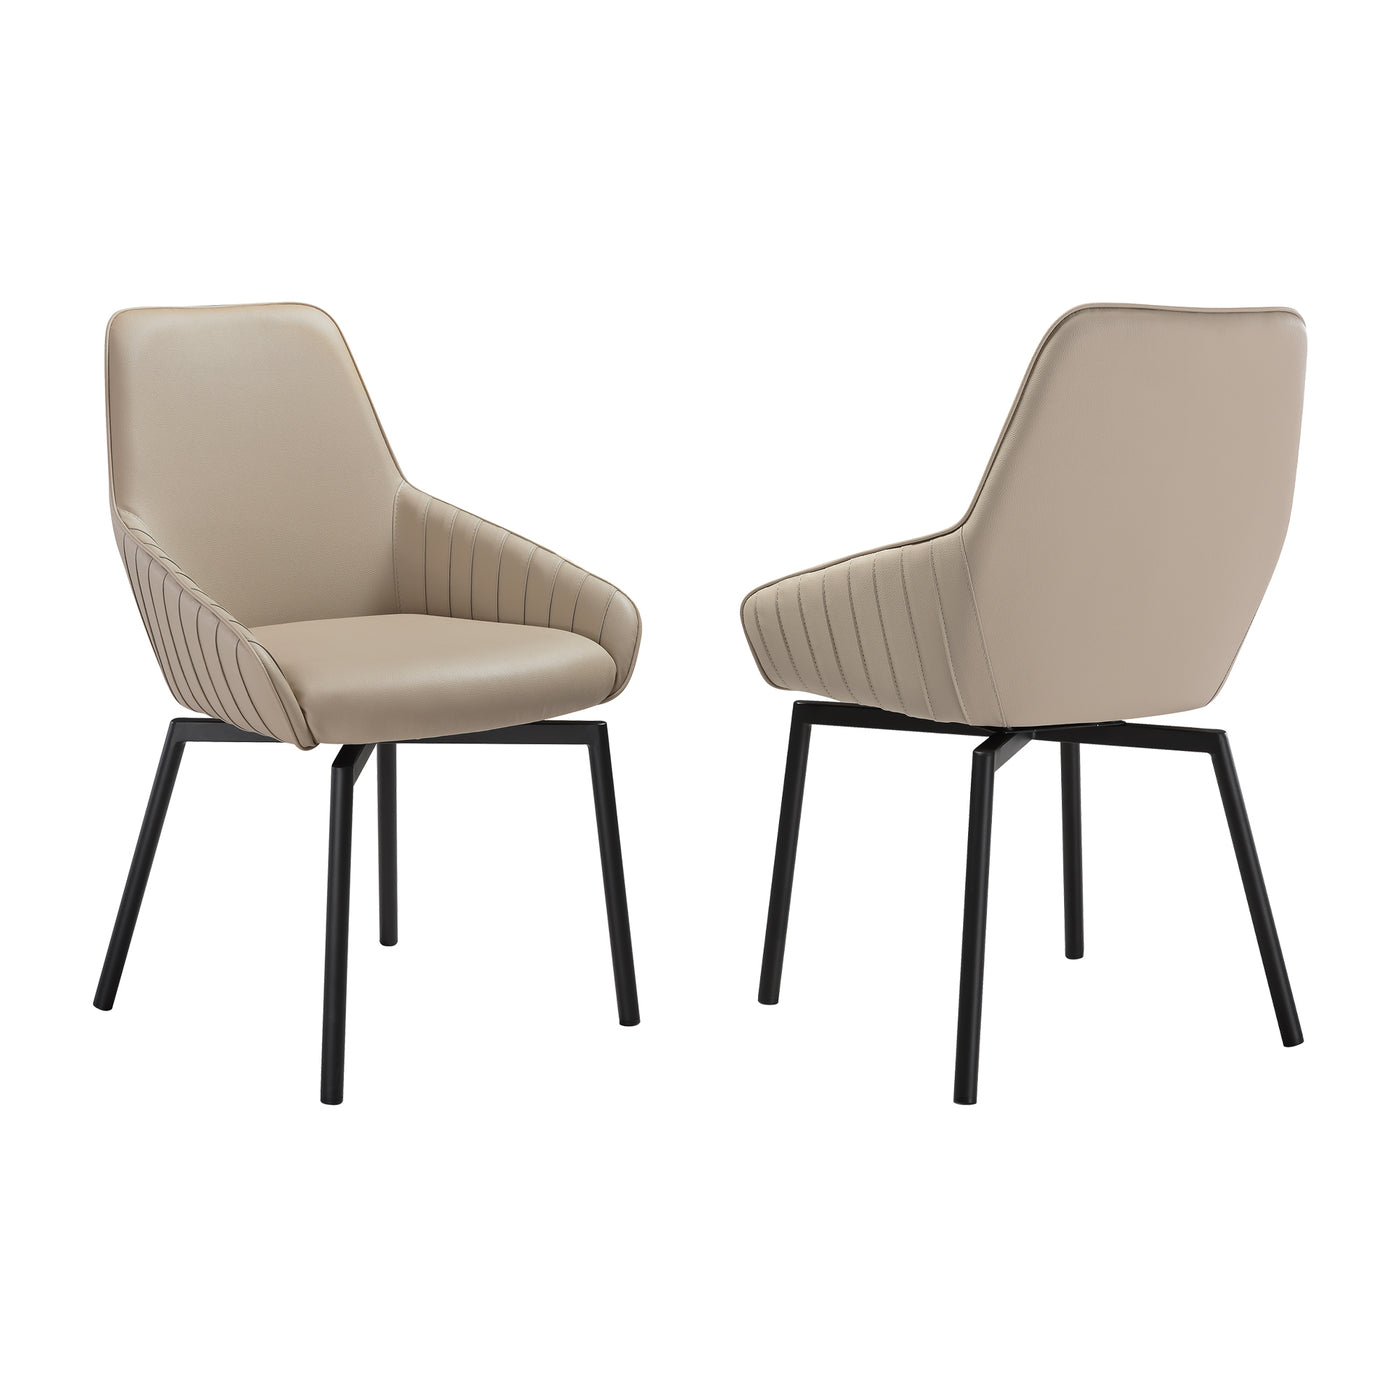 Shilo Swivel Upholstered Dining Chair Set of 2